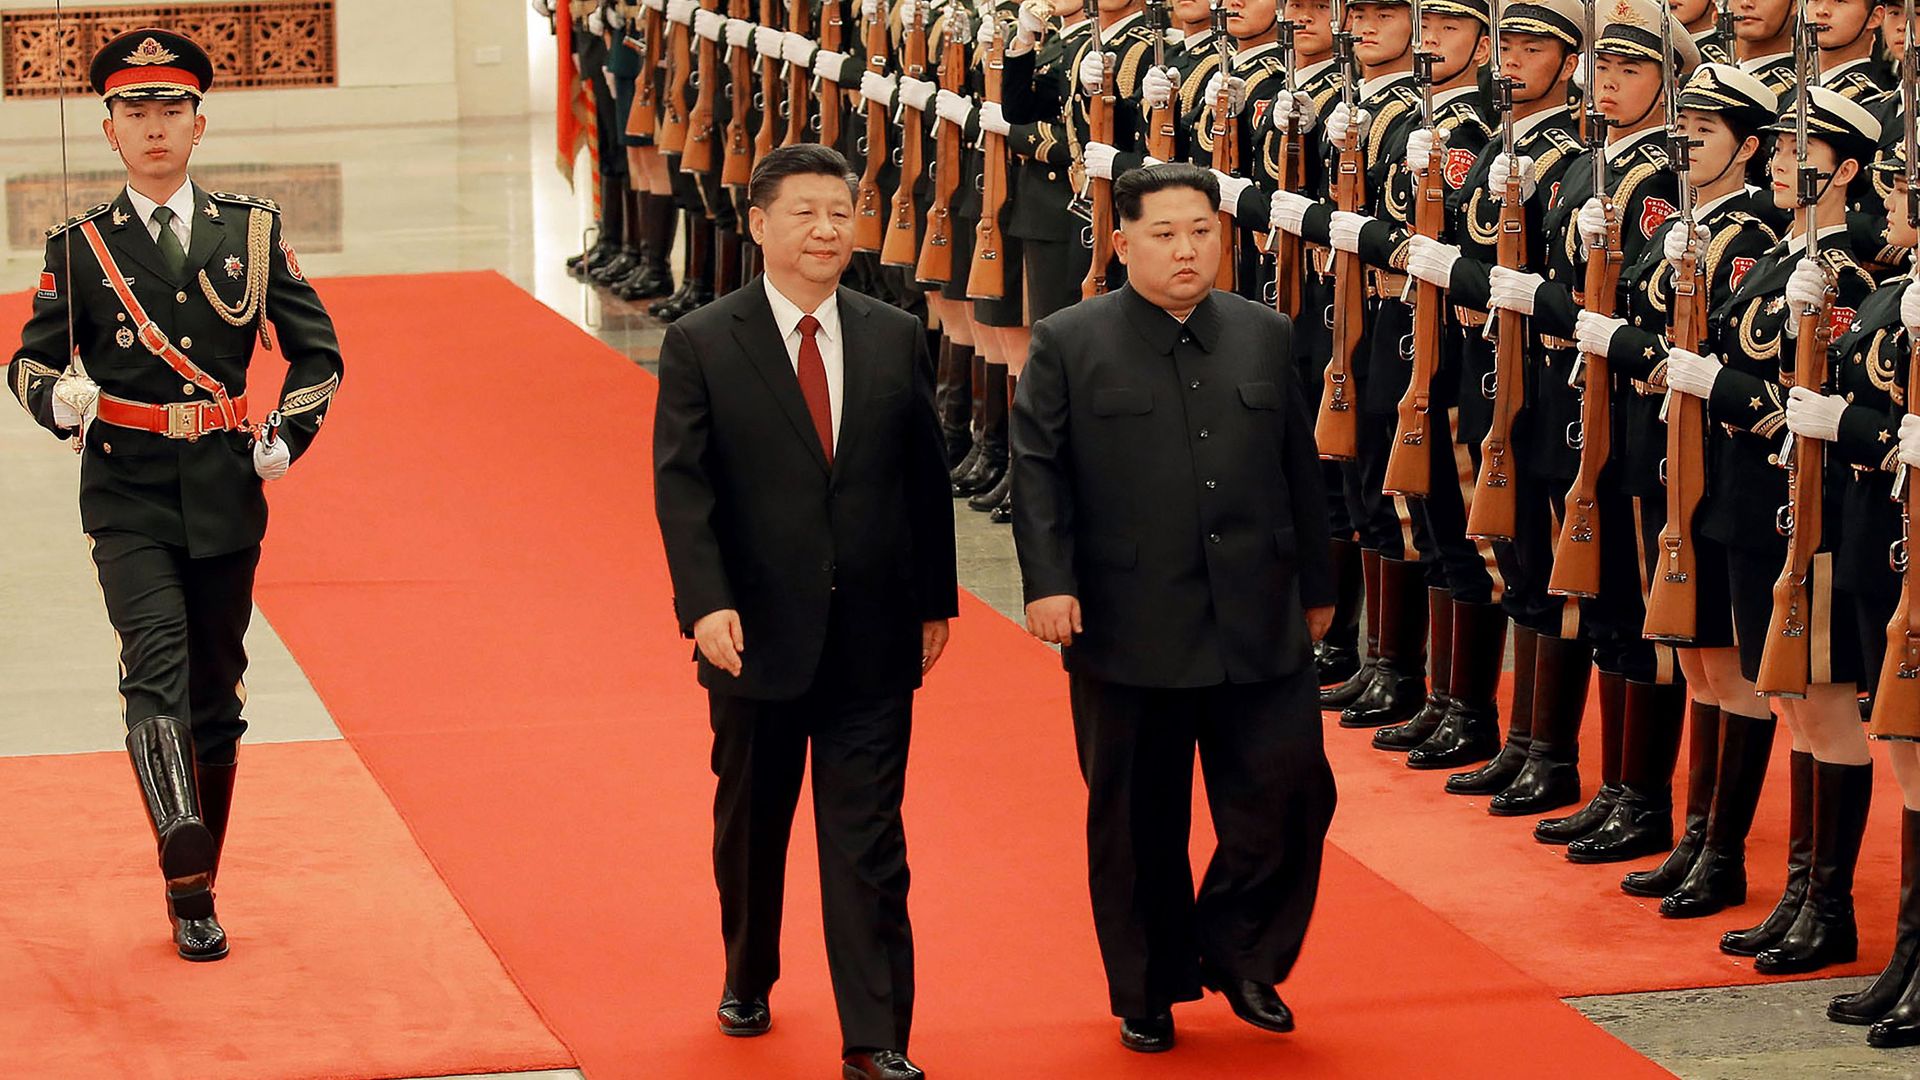 Chinese President Xi and North Korean Leader Kim march down red carpet next to line of soldiers together during their surprise meeting in Beijing